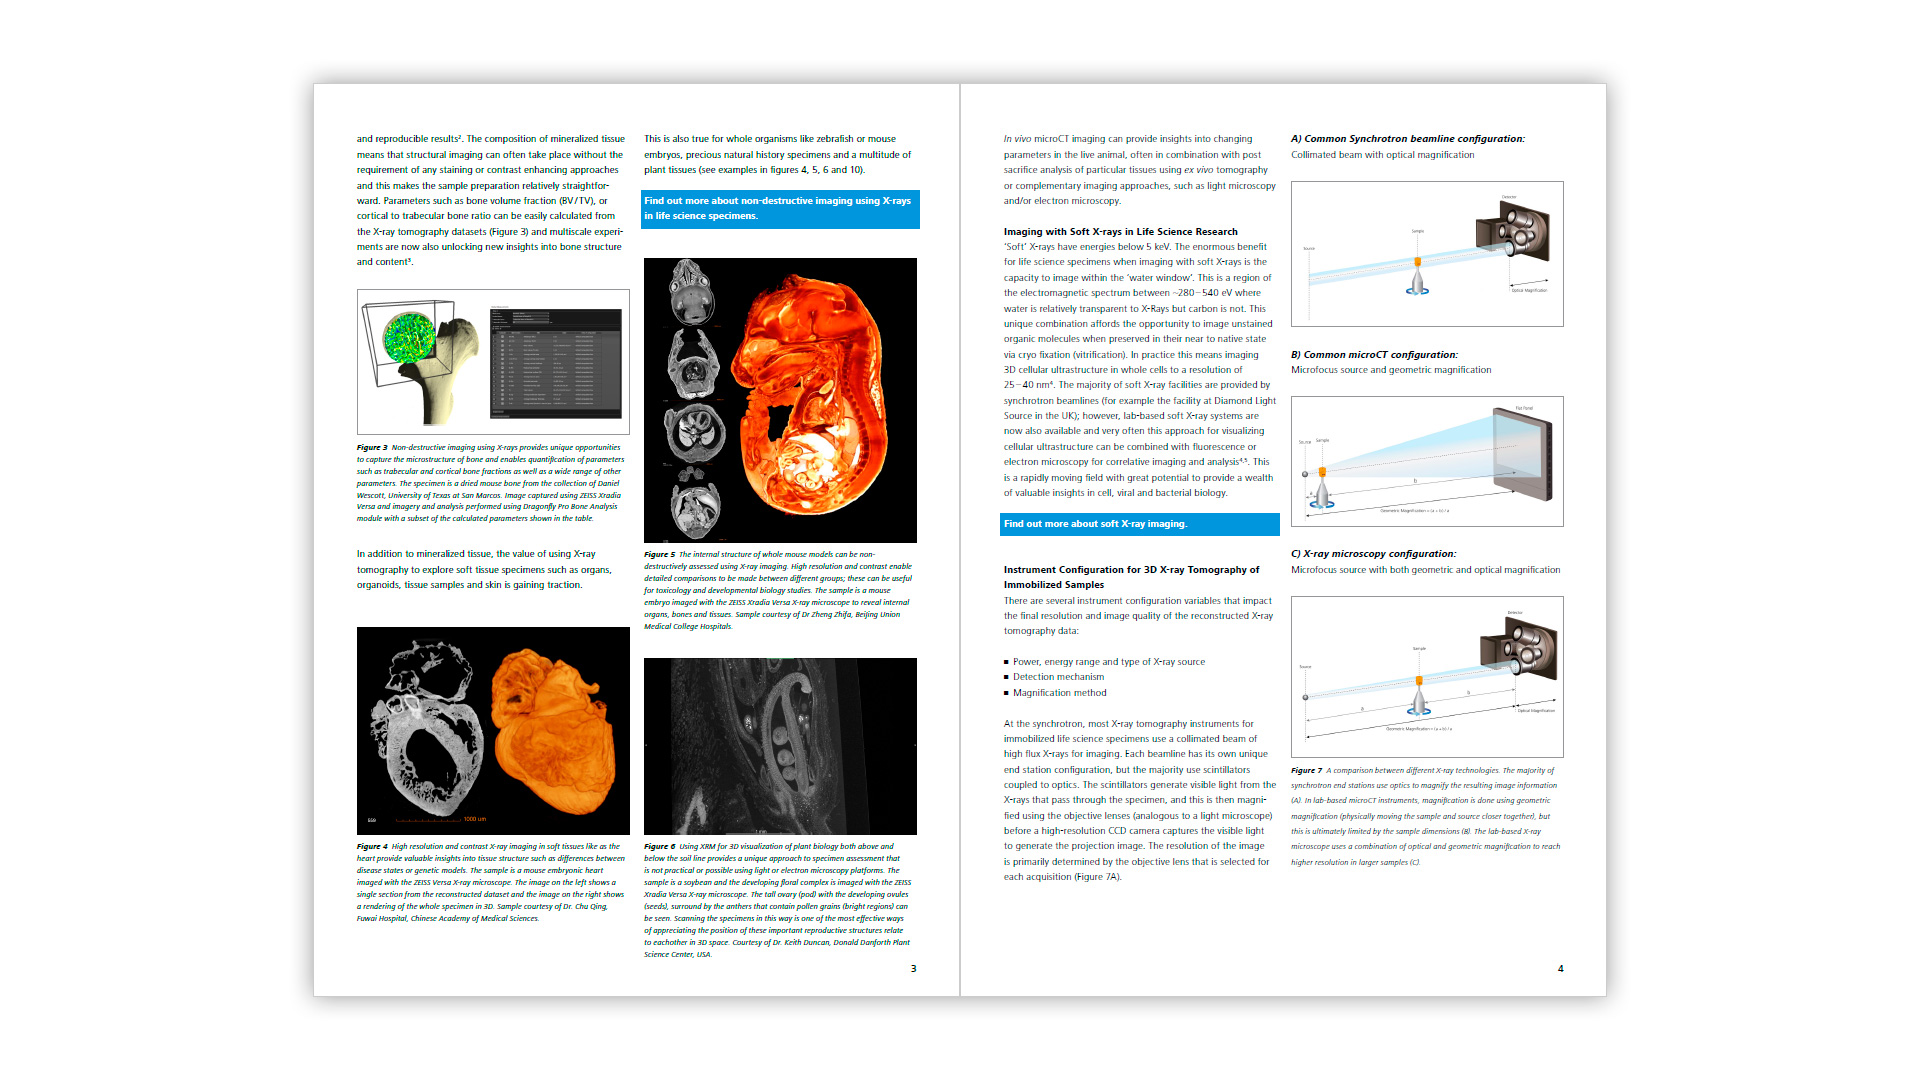 3D X-ray Imaging in Life Sciences White Paper - Preview 2